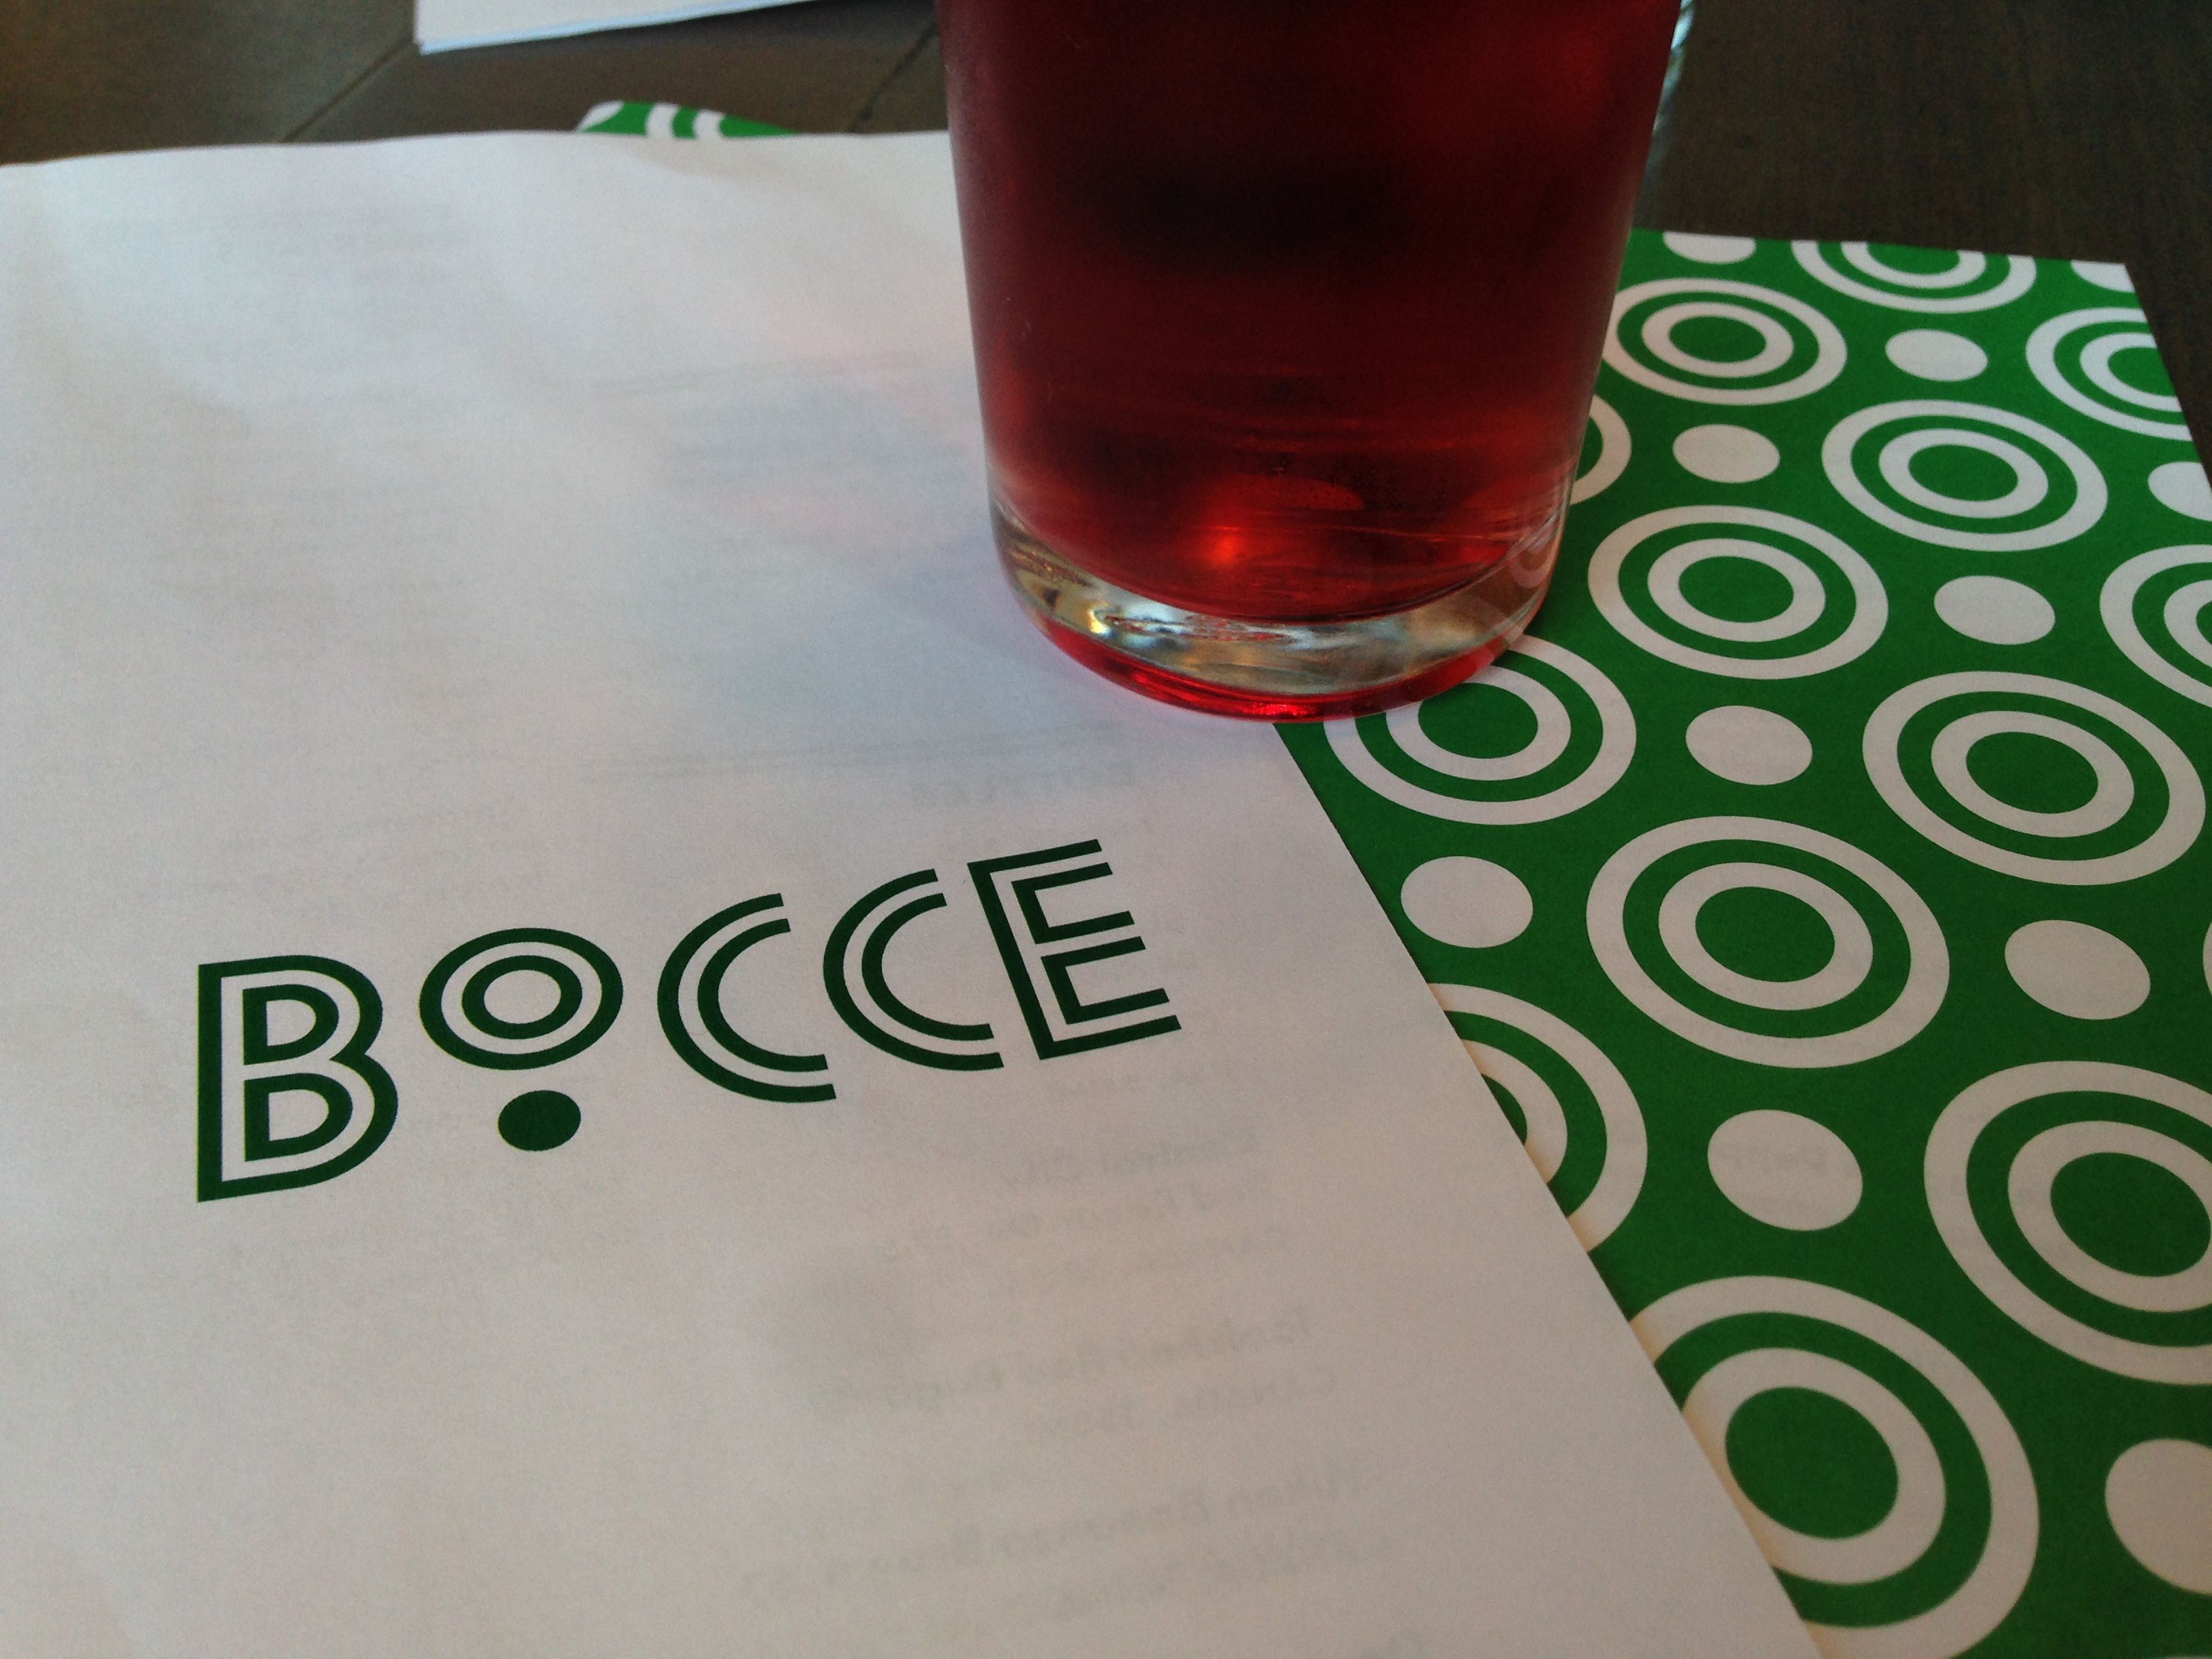 Review of Bocce Restaurant - Buzz Bishop